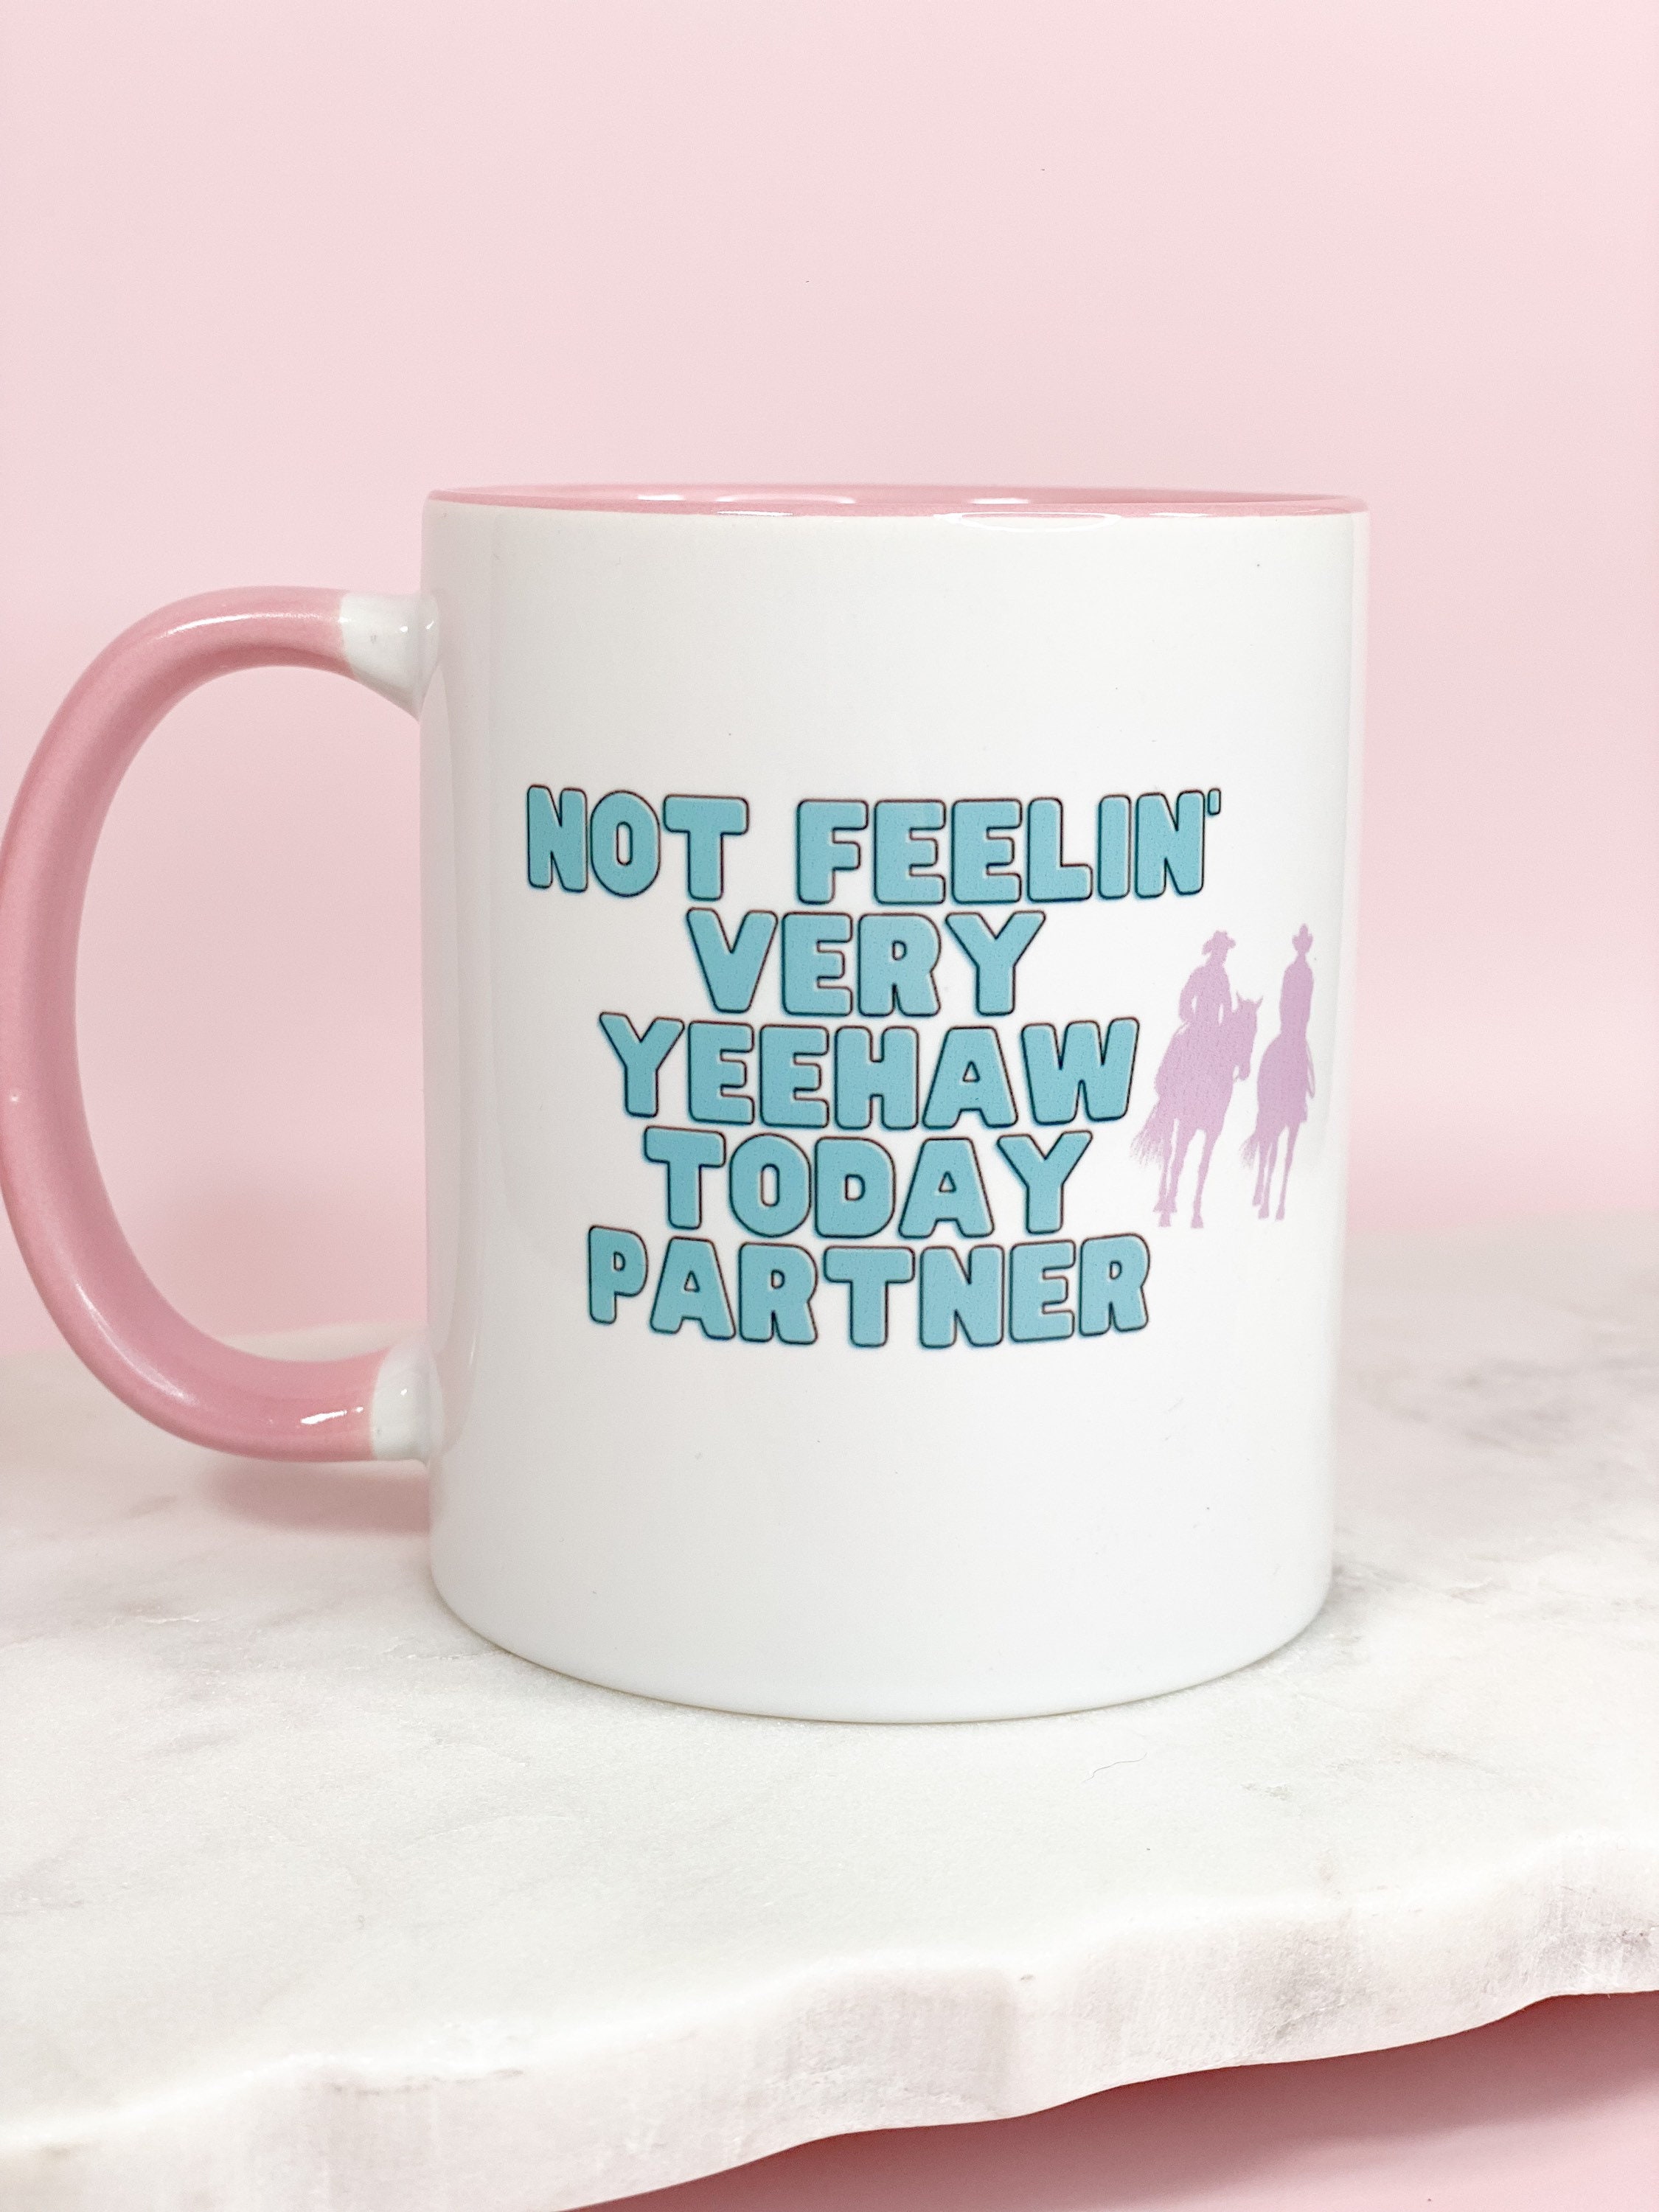 33 Ridiculously Funny Coffee Mugs That Will Have You Laughing Your Butt Off